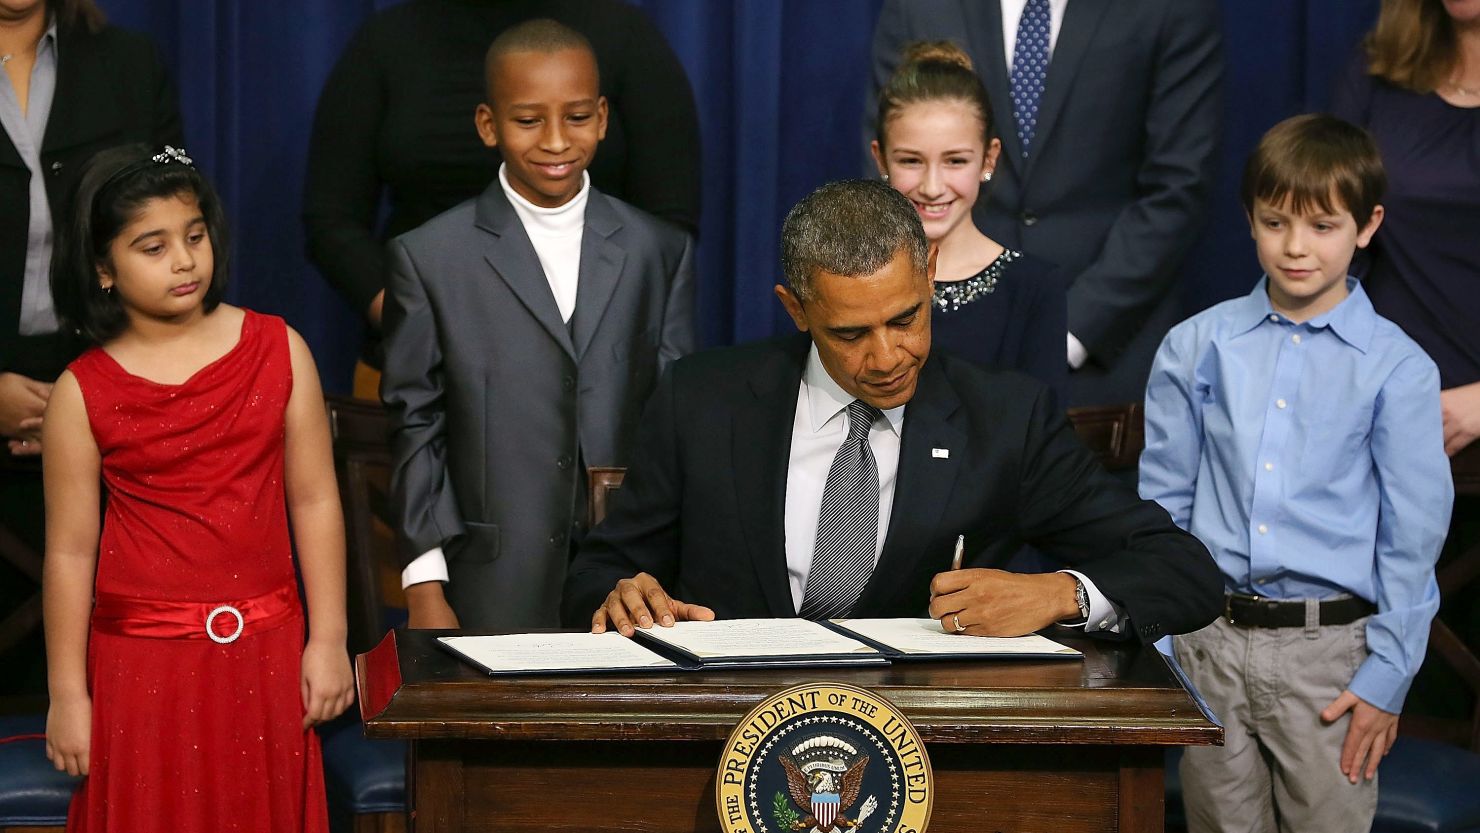 President Obama signs new gun law proposals as children who wrote letters to the White House about gun violence look on.